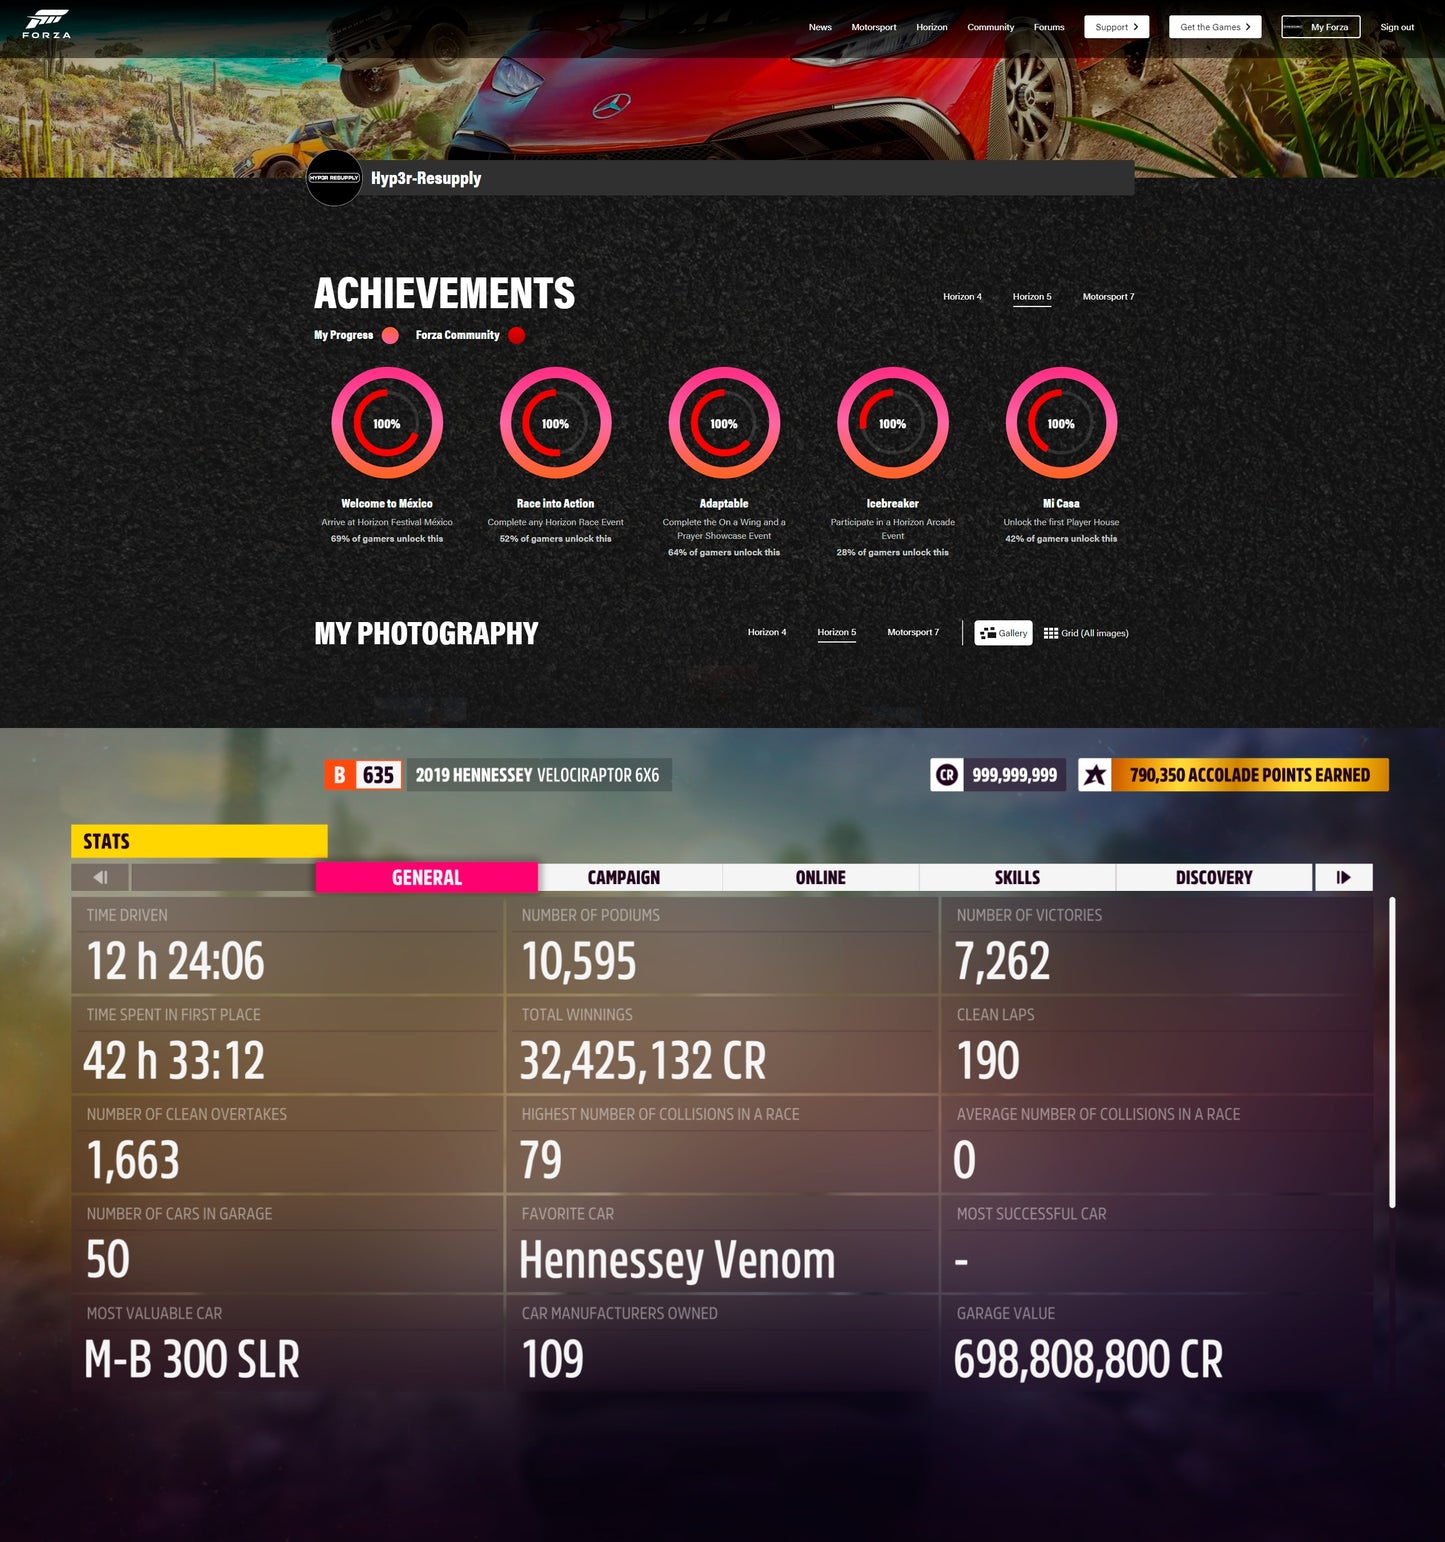 Forza Horizon 5 Modded Account [All Rare Cars X3 (Last Series Included) + 999.999.999: Credits & Super Wheelspin & Wheelspin & Car Points & Forzathon Points + Level + 100% Progress]